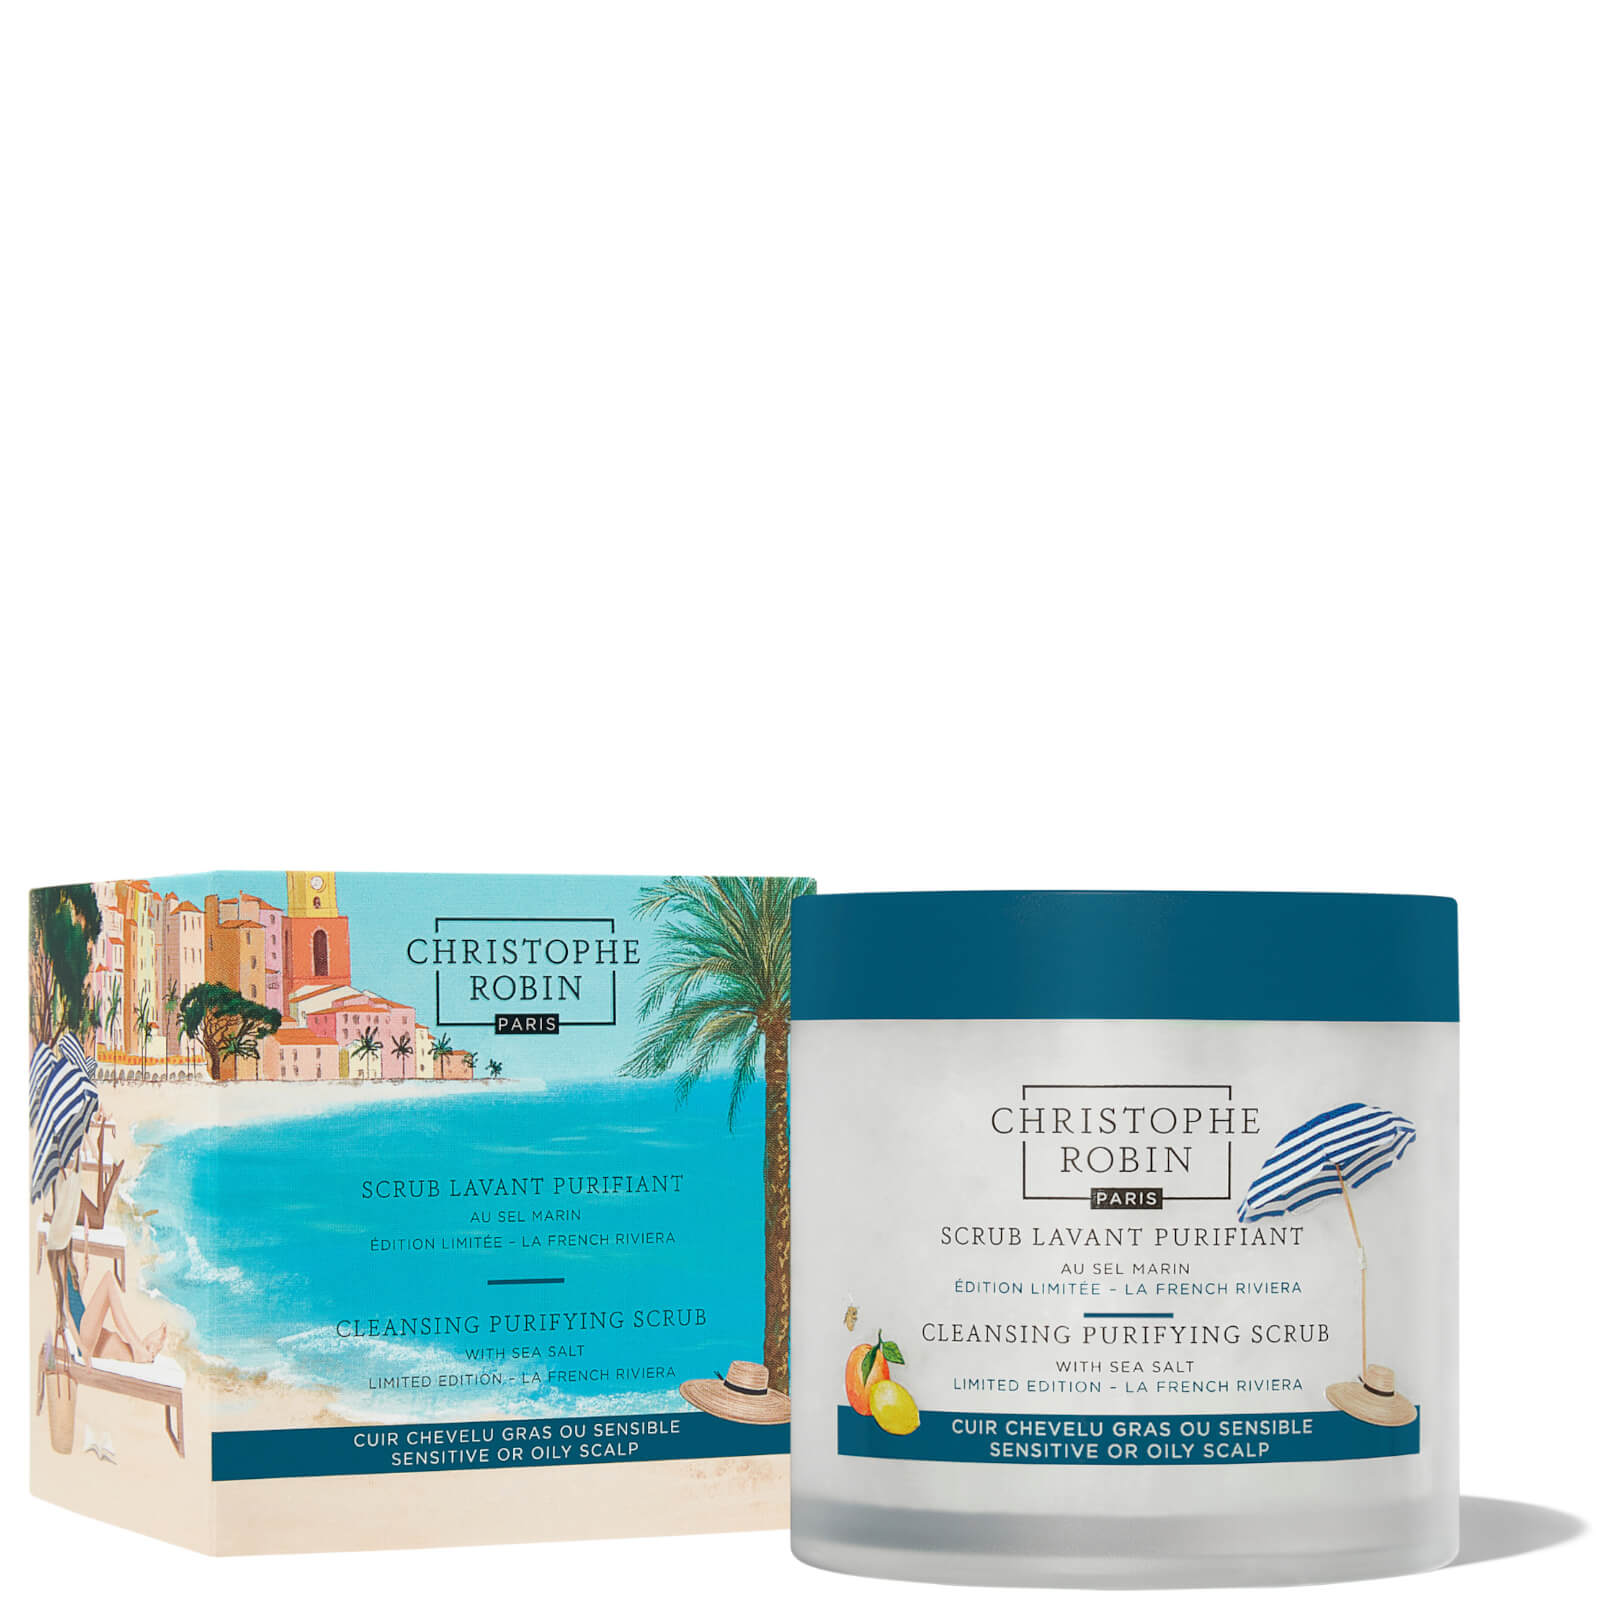 Christophe Robin Limited Edition French Riviera Cleansing Purifying Scrub with Sea Salt 250ml von Christophe Robin